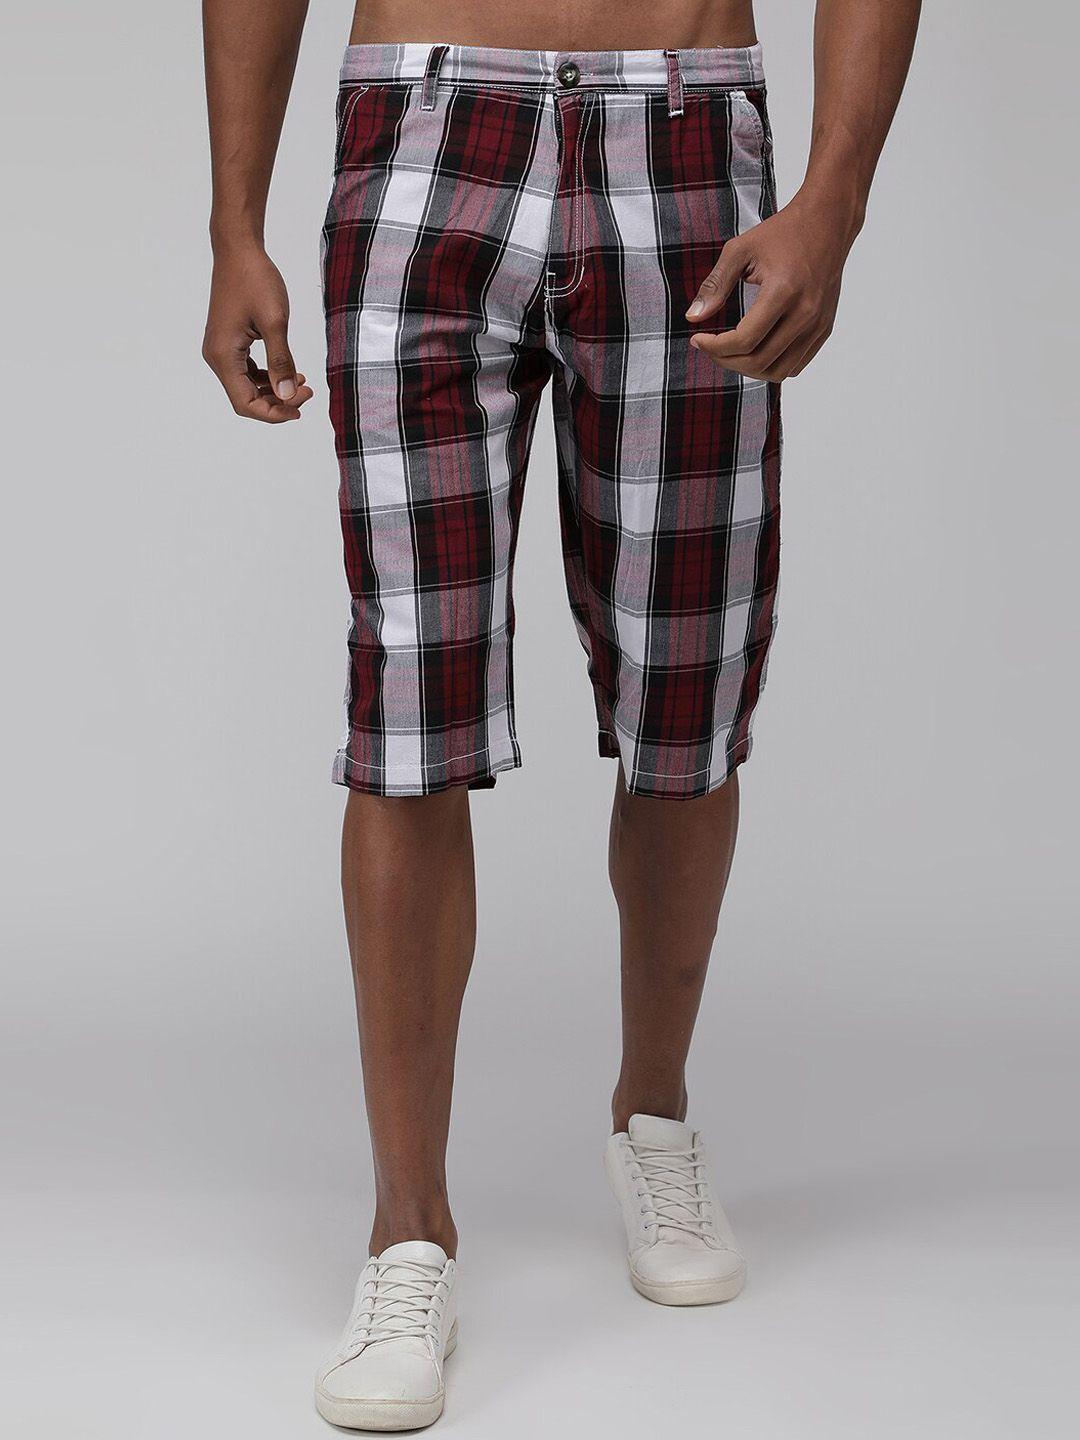 sporto-men-maroon-checked-outdoor-with-technology-shorts